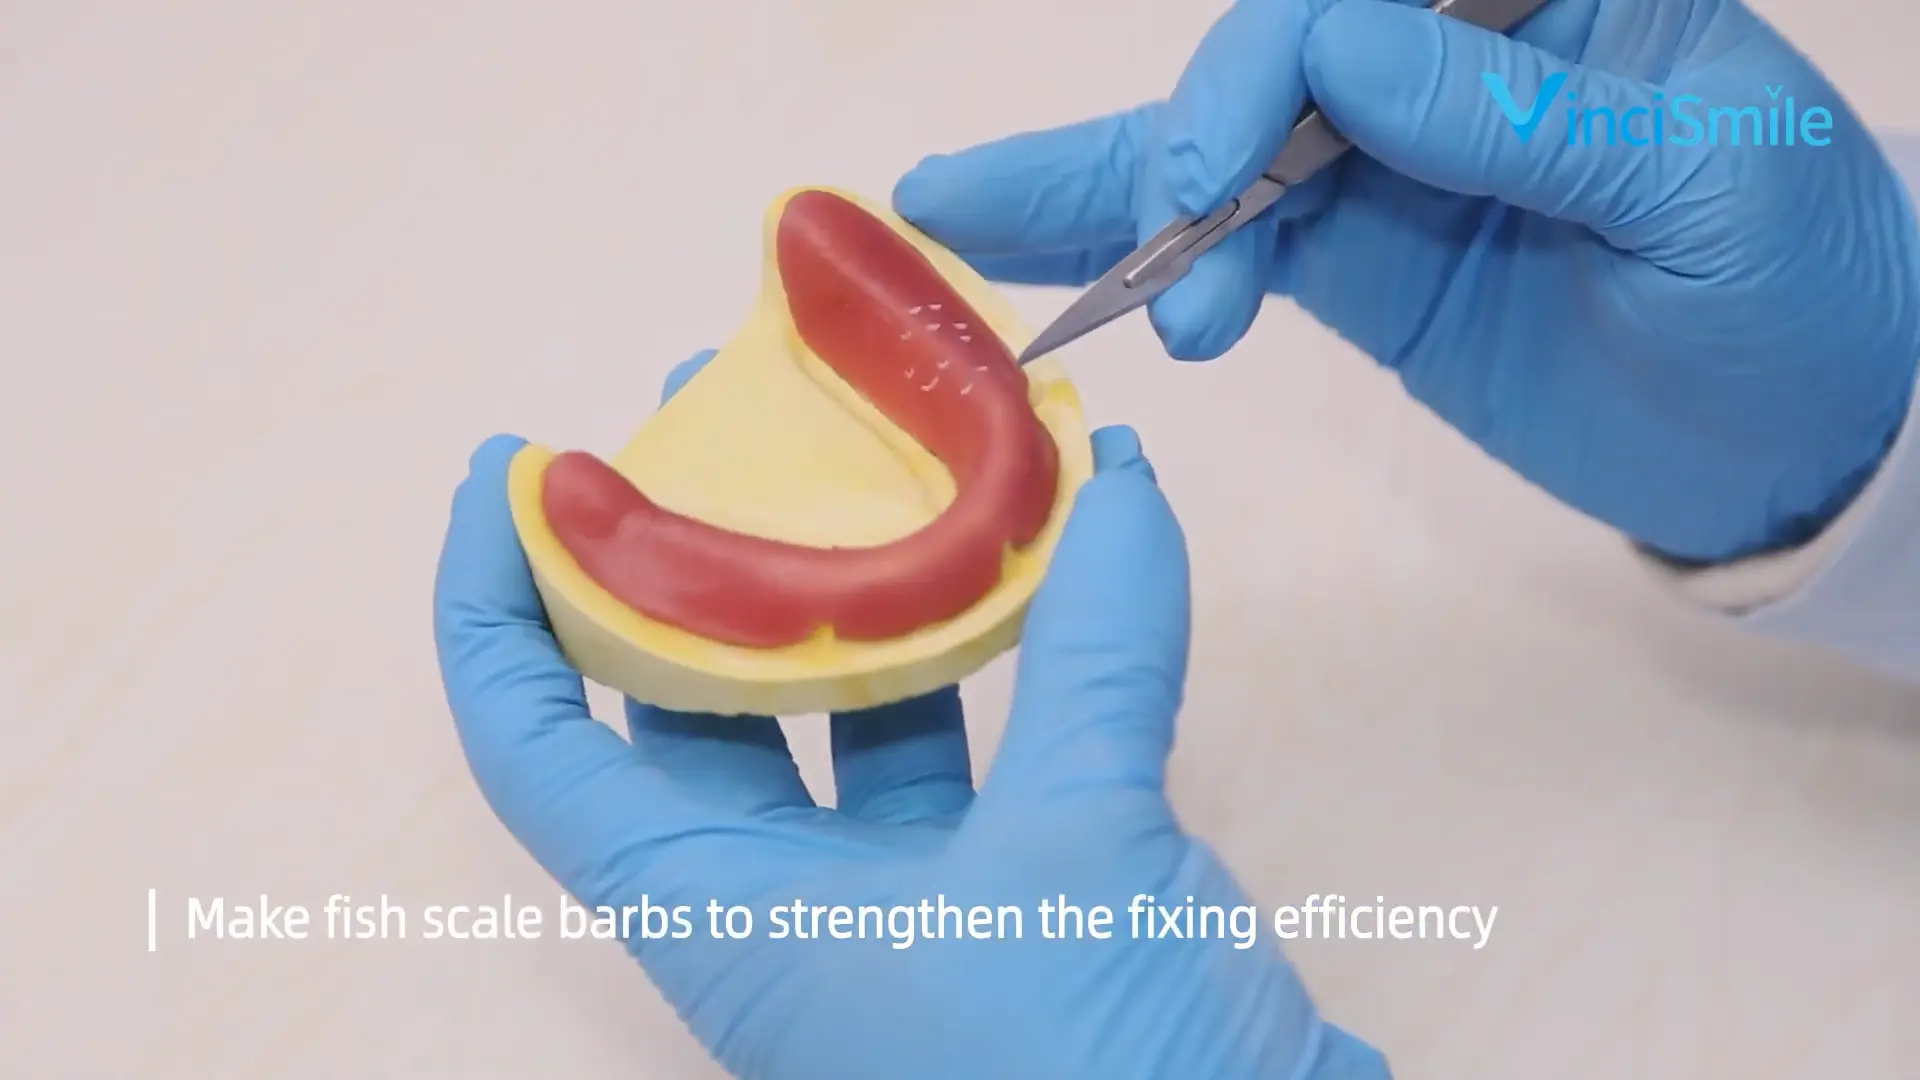 Application of Light Curing Tray in Complete Denture - Make Temperatory Base